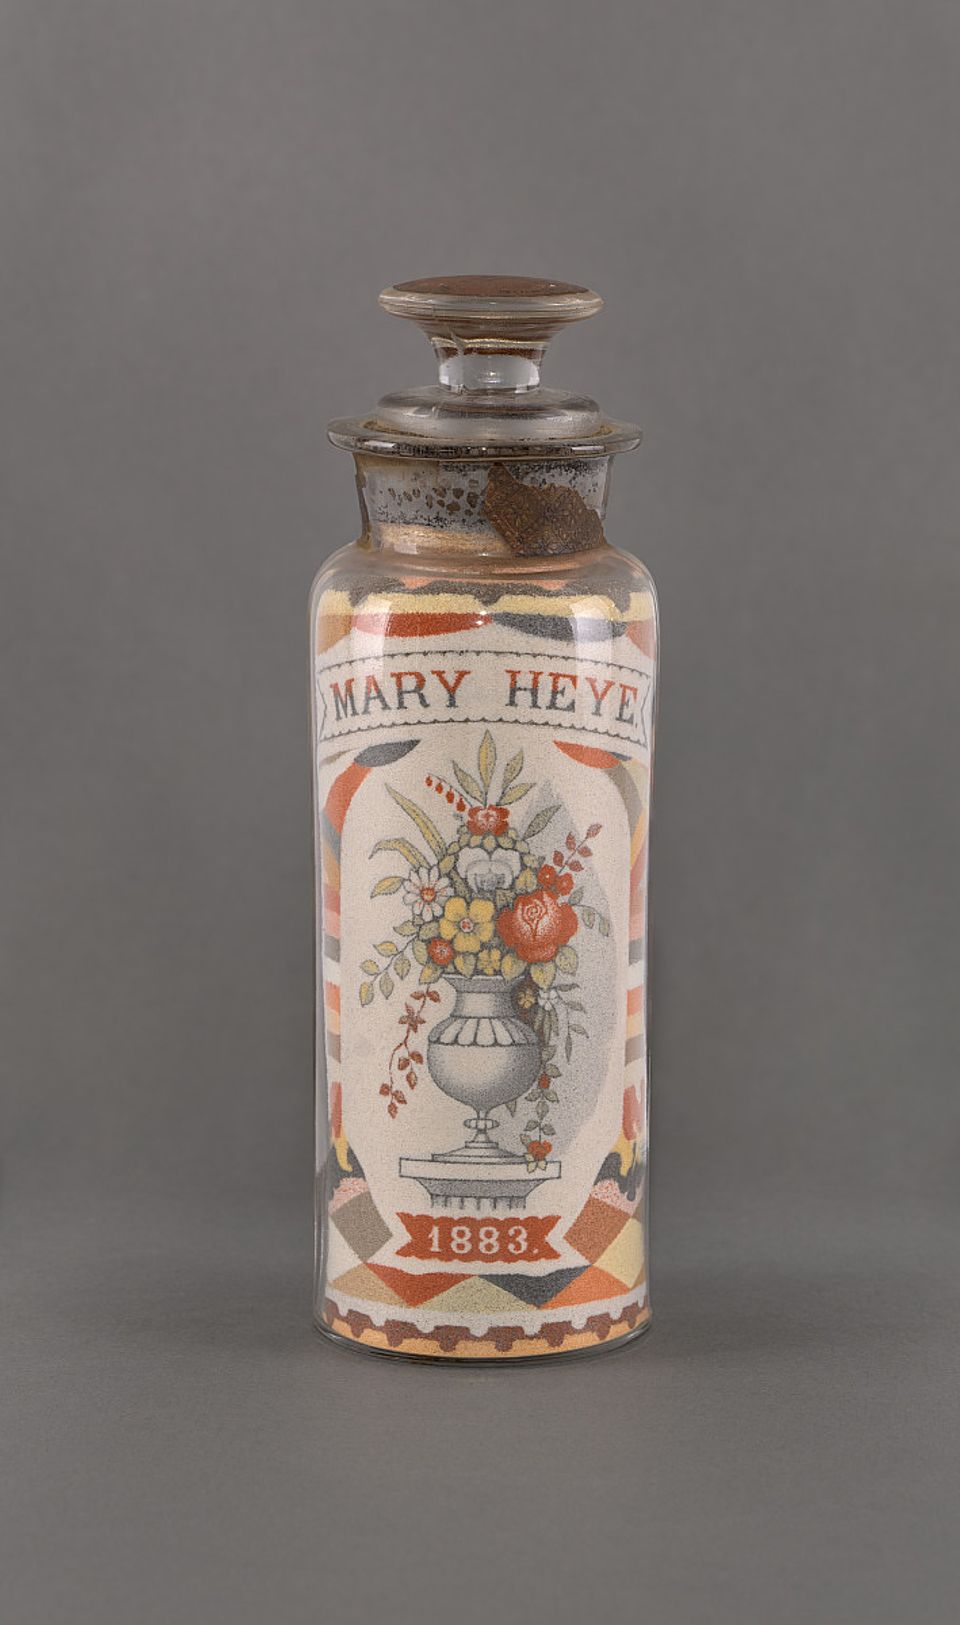 A tall, slim bottle holding sand that says Mary Heye and has an ornate design.